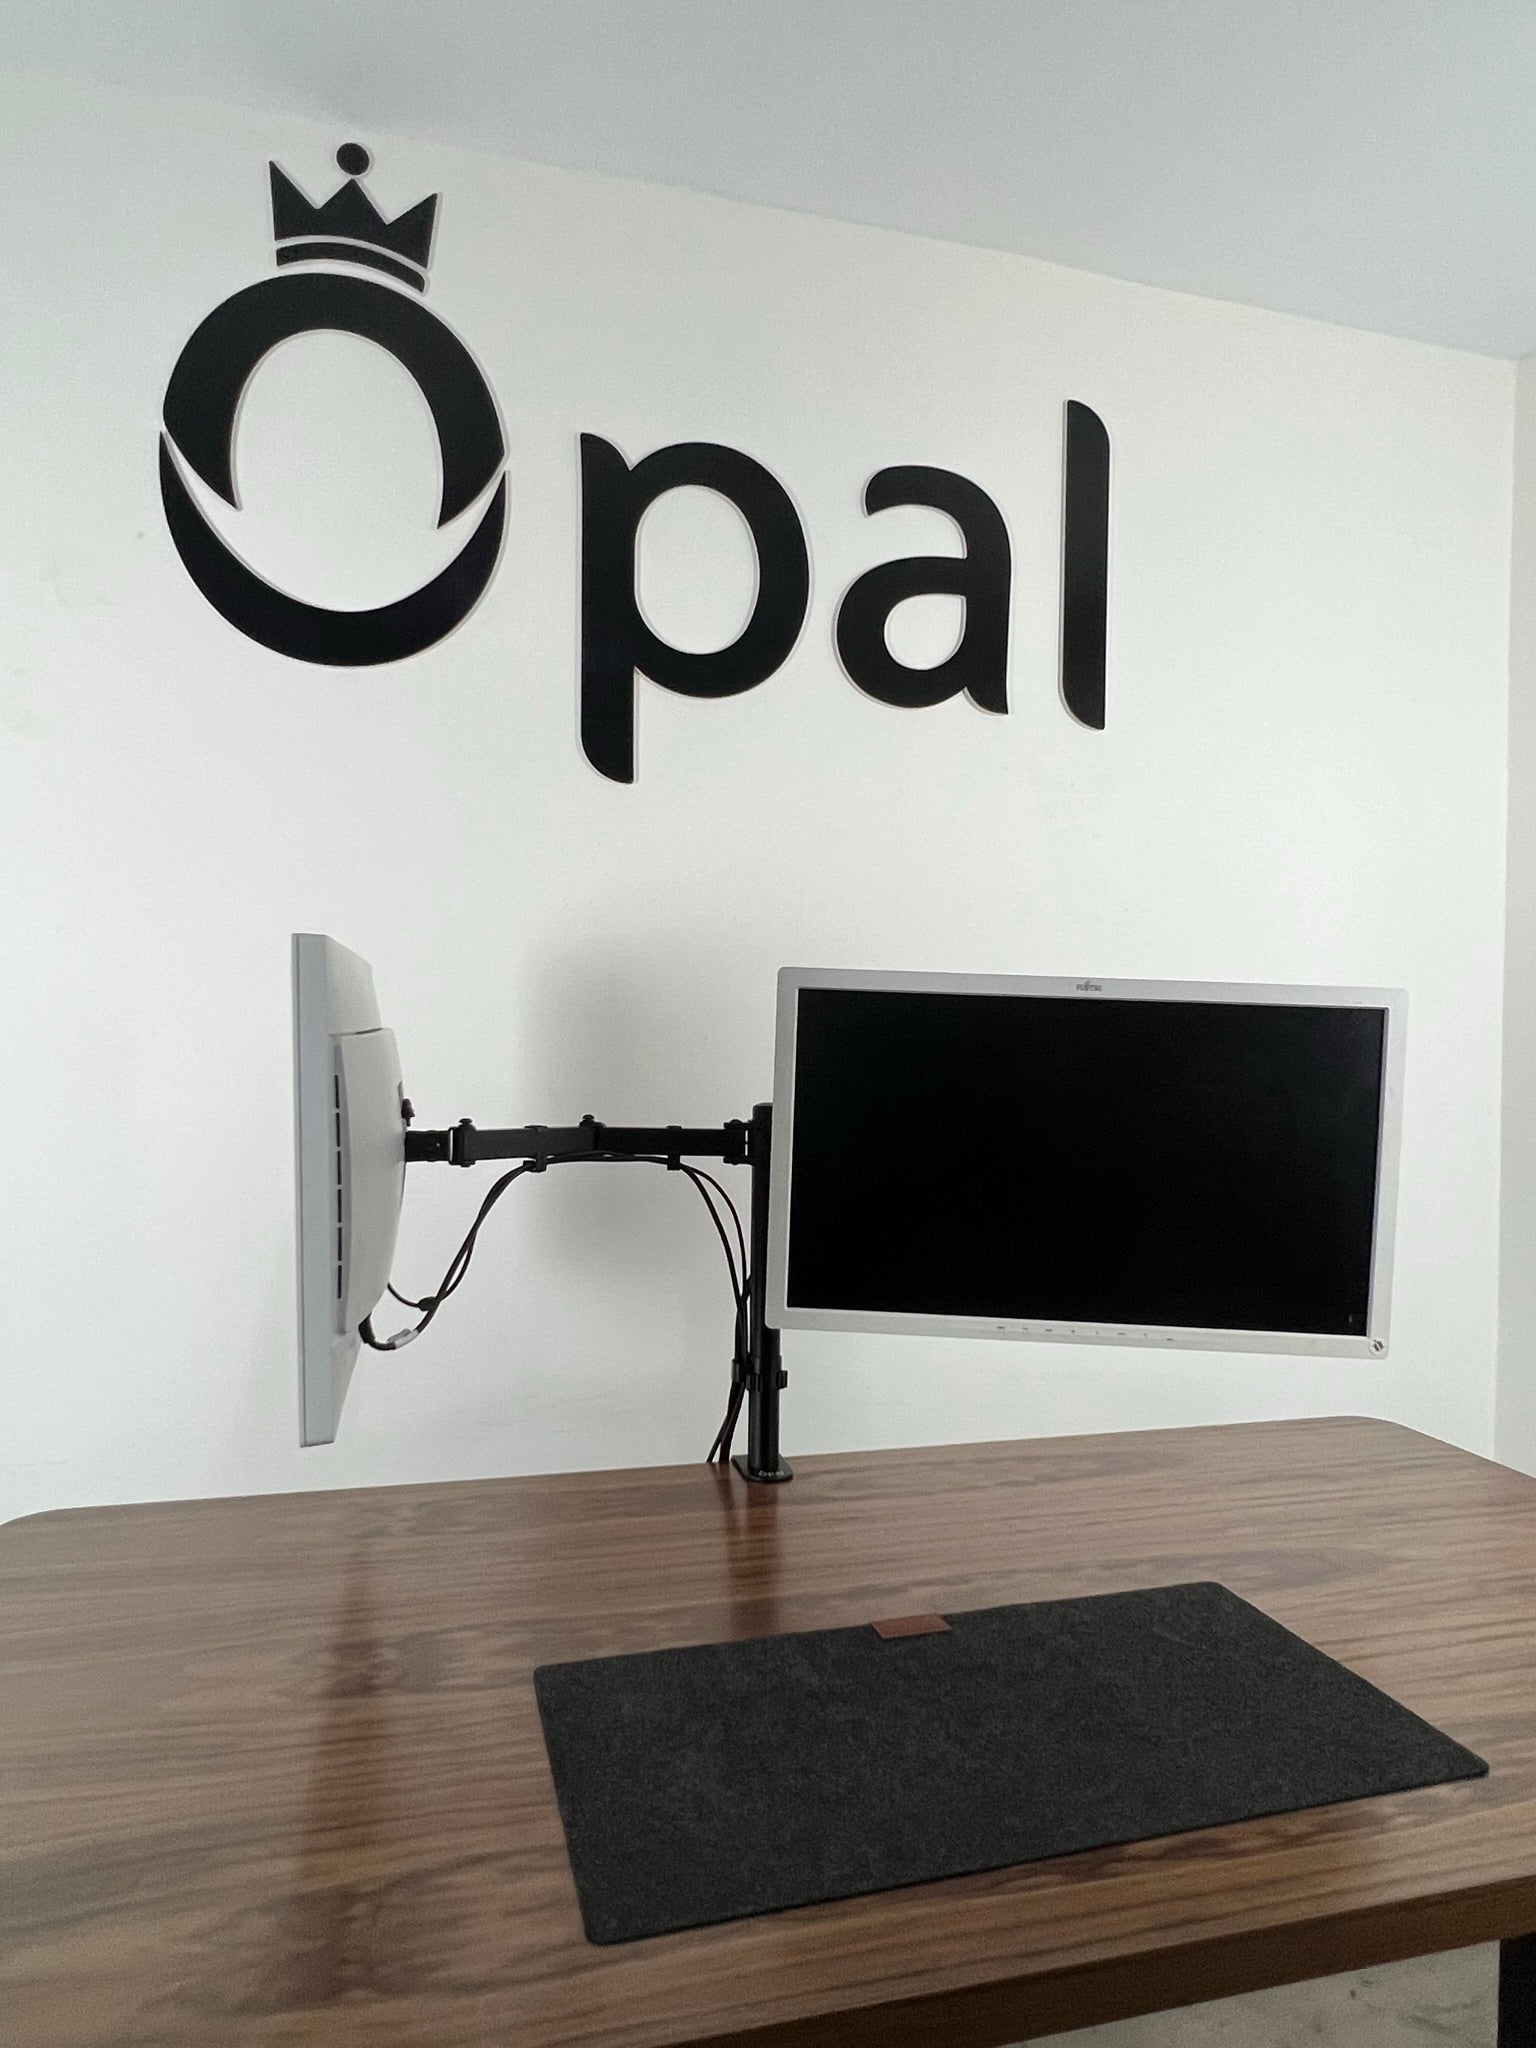 OPE-6 Double Arm Stand